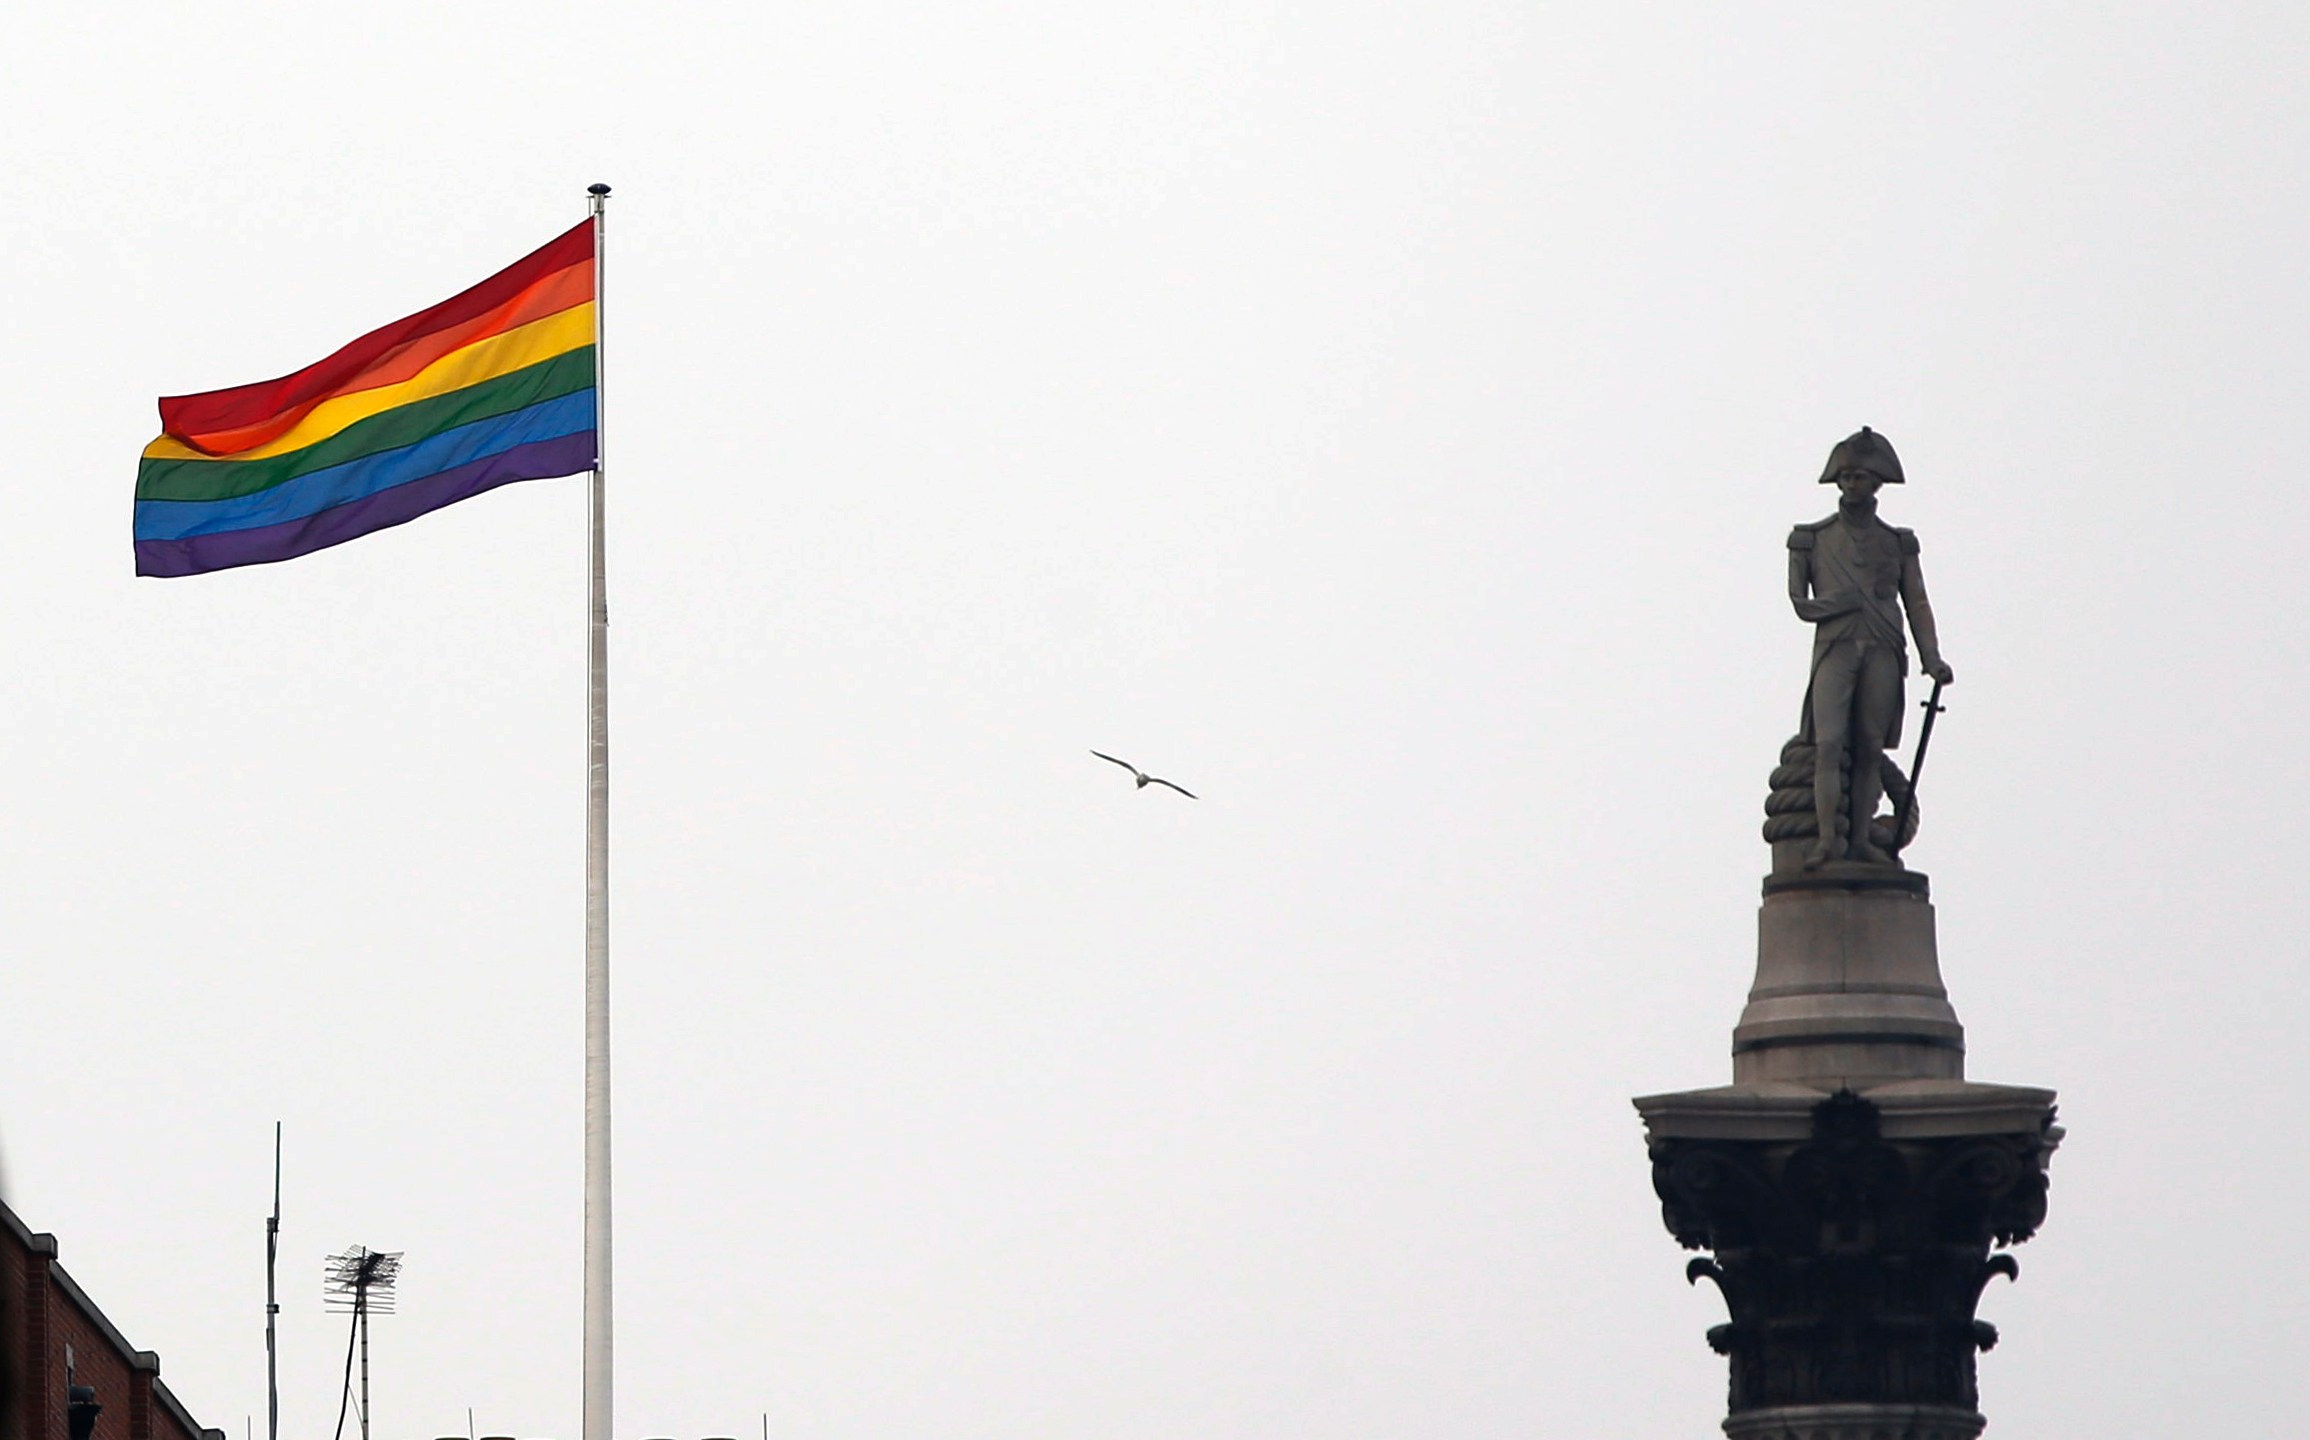 FILE - The rainbow flag, a symbol of the LGBTQ+ community, flies over a building next to Nelson's Column monument, right, in Trafalgar Square, central London, Britain, March 28, 2014. Legislators in at least two U.S. states are citing England’s recent decision to severely restrict gender transitions for young people as support for their own related bills. (AP Photo/Lefteris Pitarakis, File)